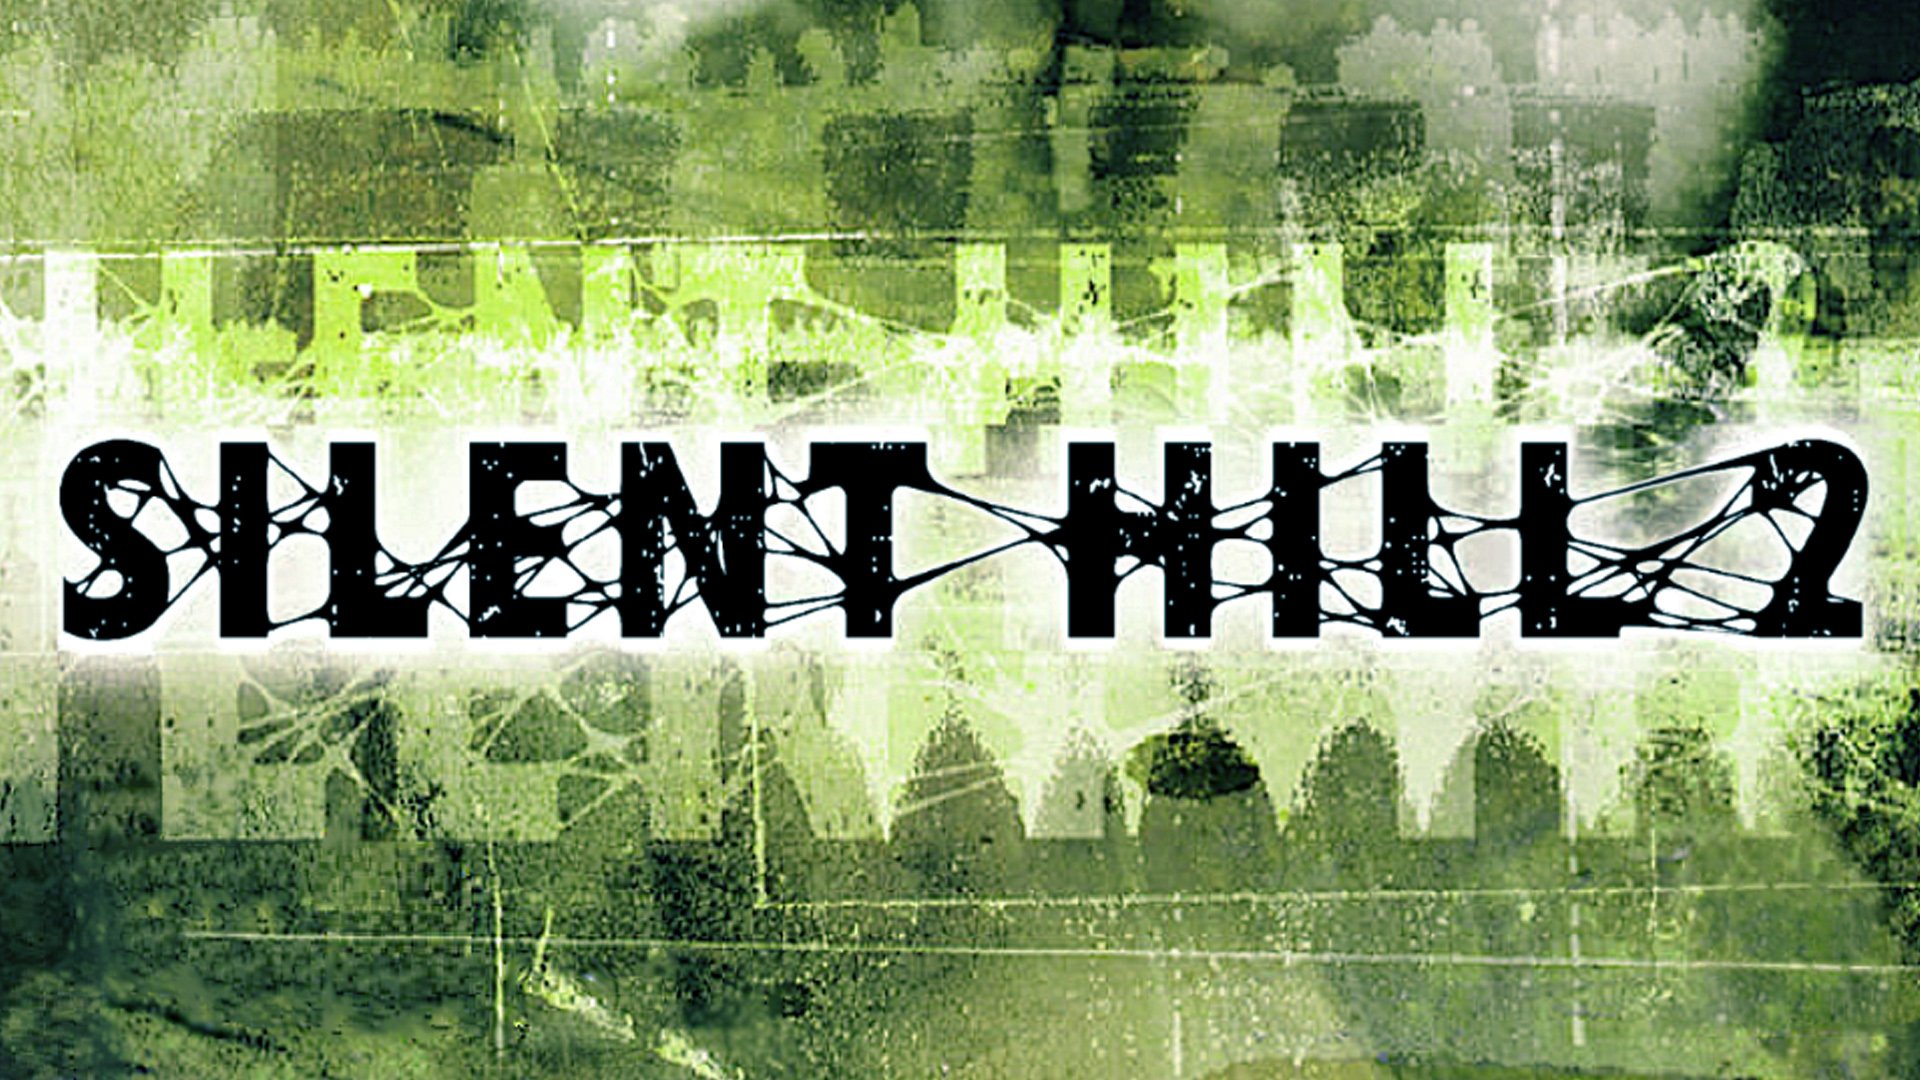 Silent Hill 2 Remake Release Date May Have Been Revealed - Insider